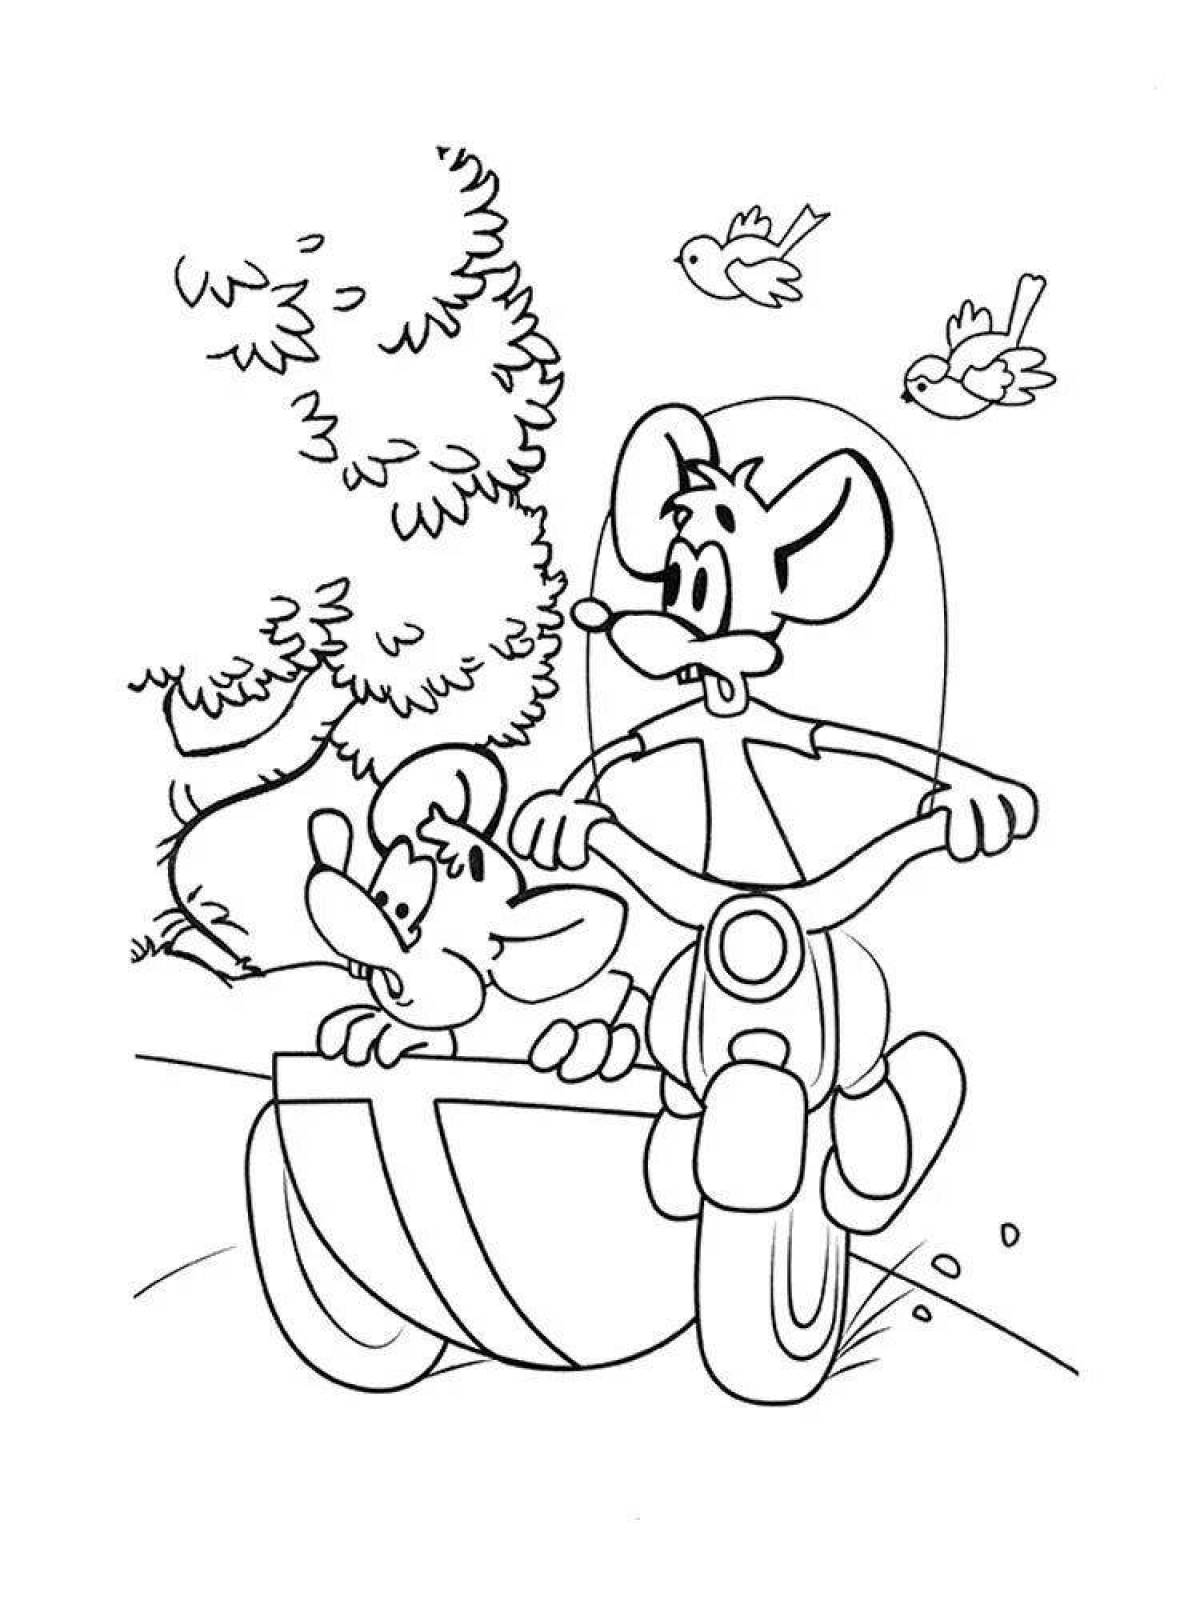 Colored funny leopold cat coloring page